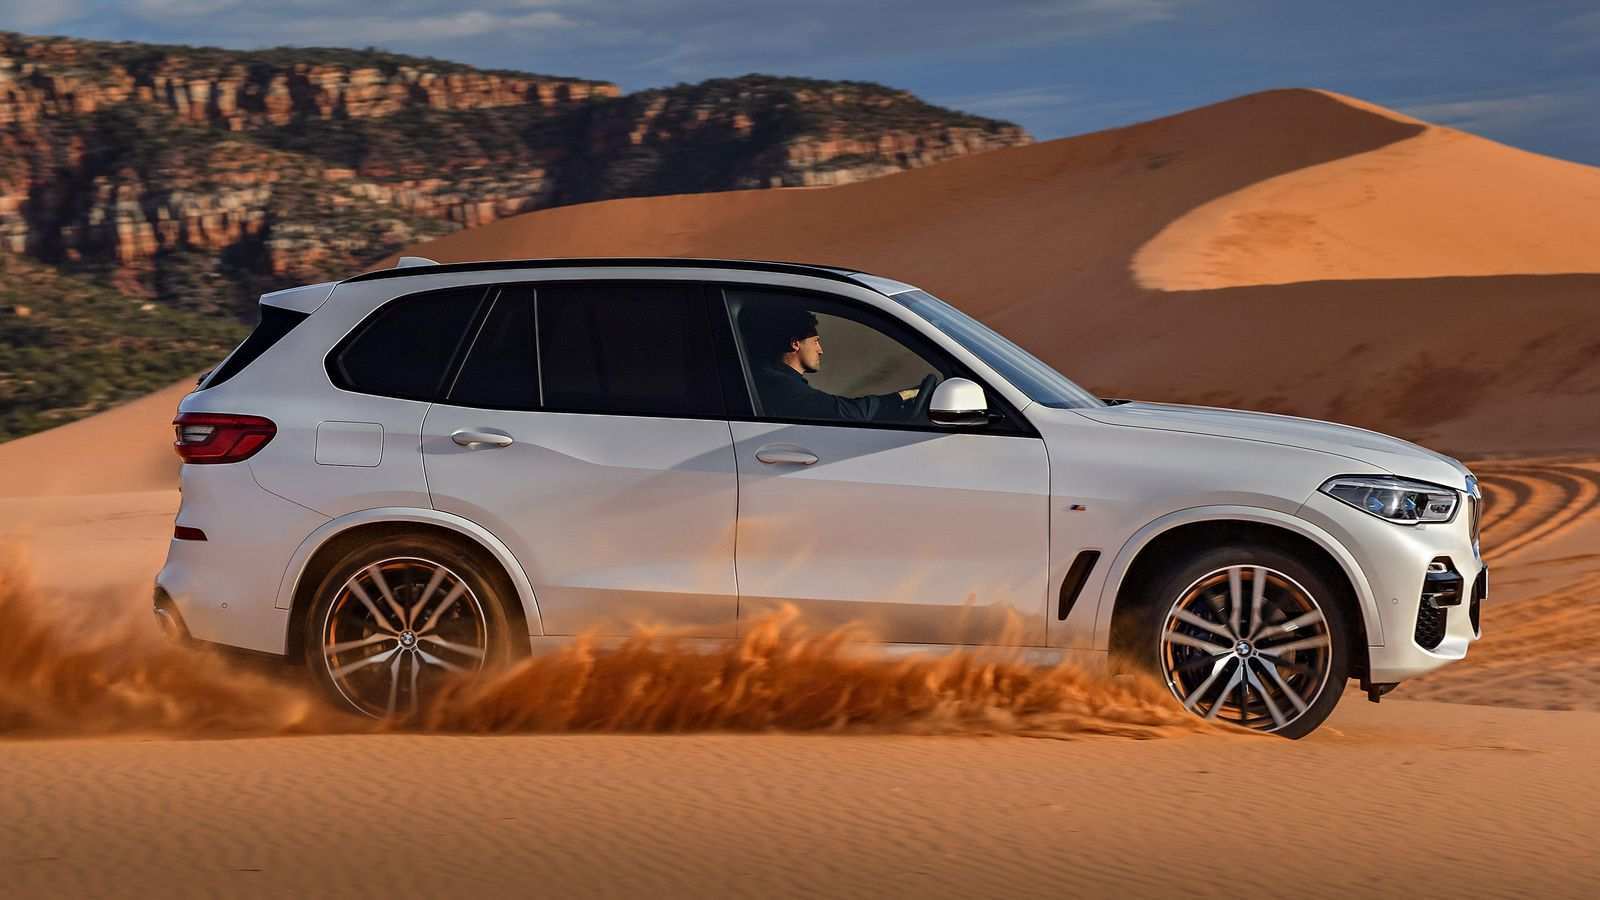 New 2020 Next Gen BMW X5 Suv Wallpaper by 2020 Next Gen BMW X5 Suv Review, Car Review